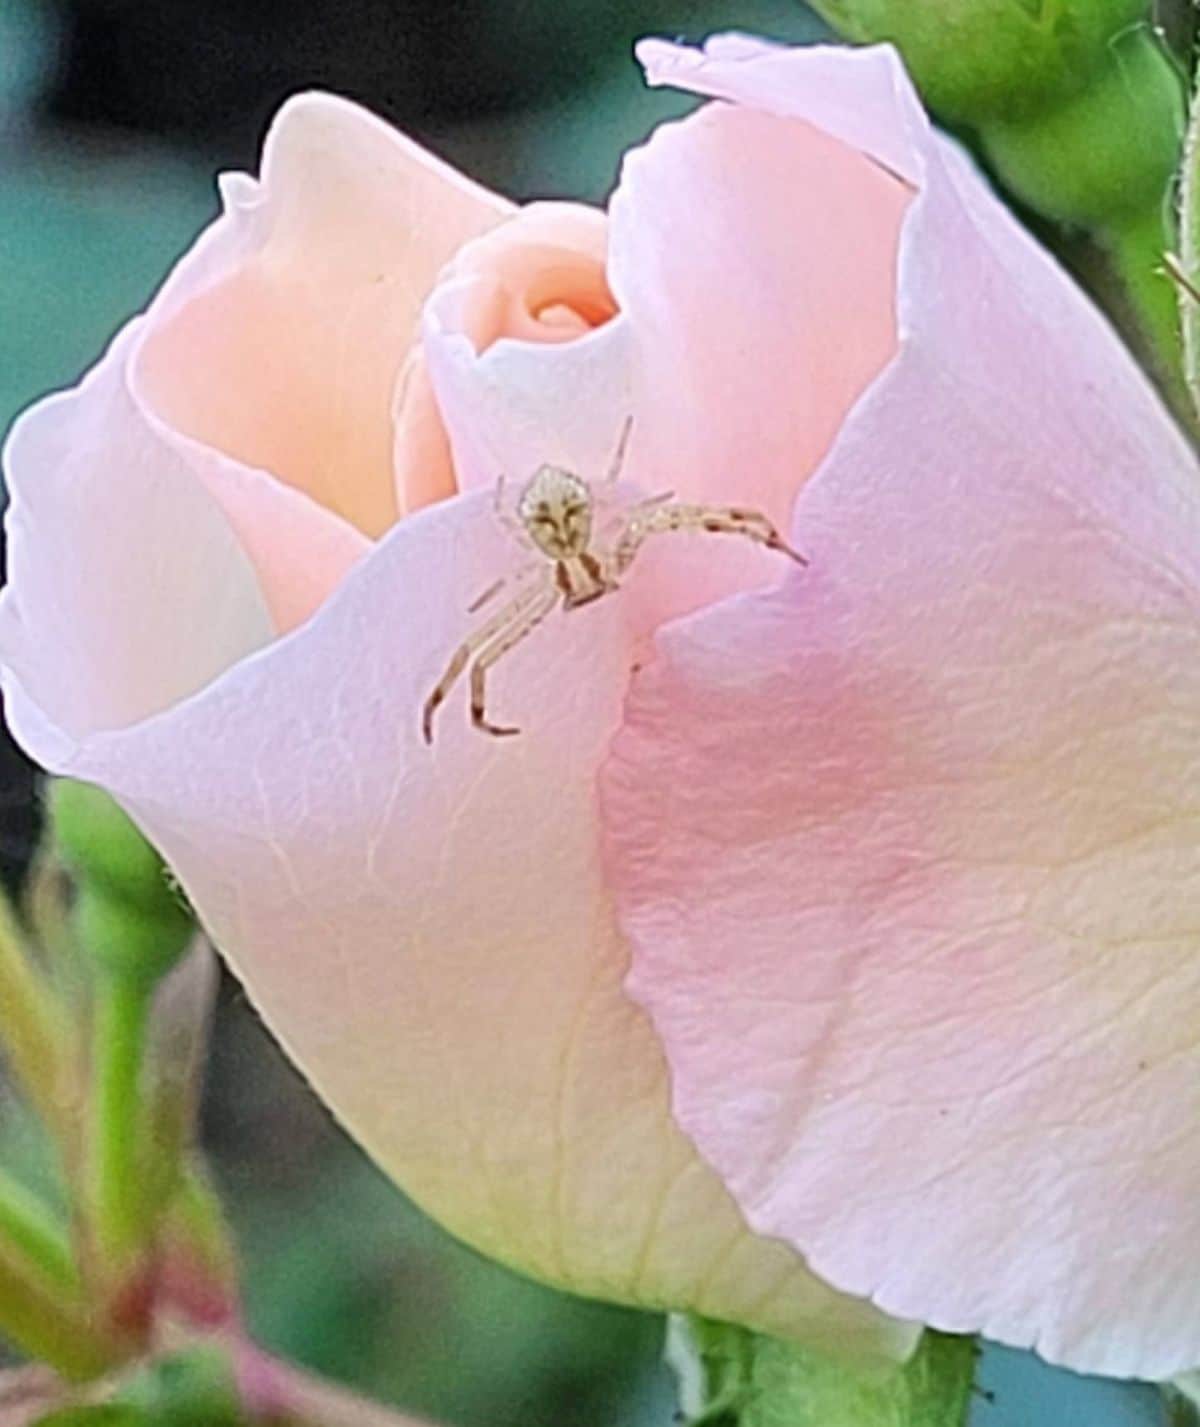 A spider helps manage insect pests in a rose garden